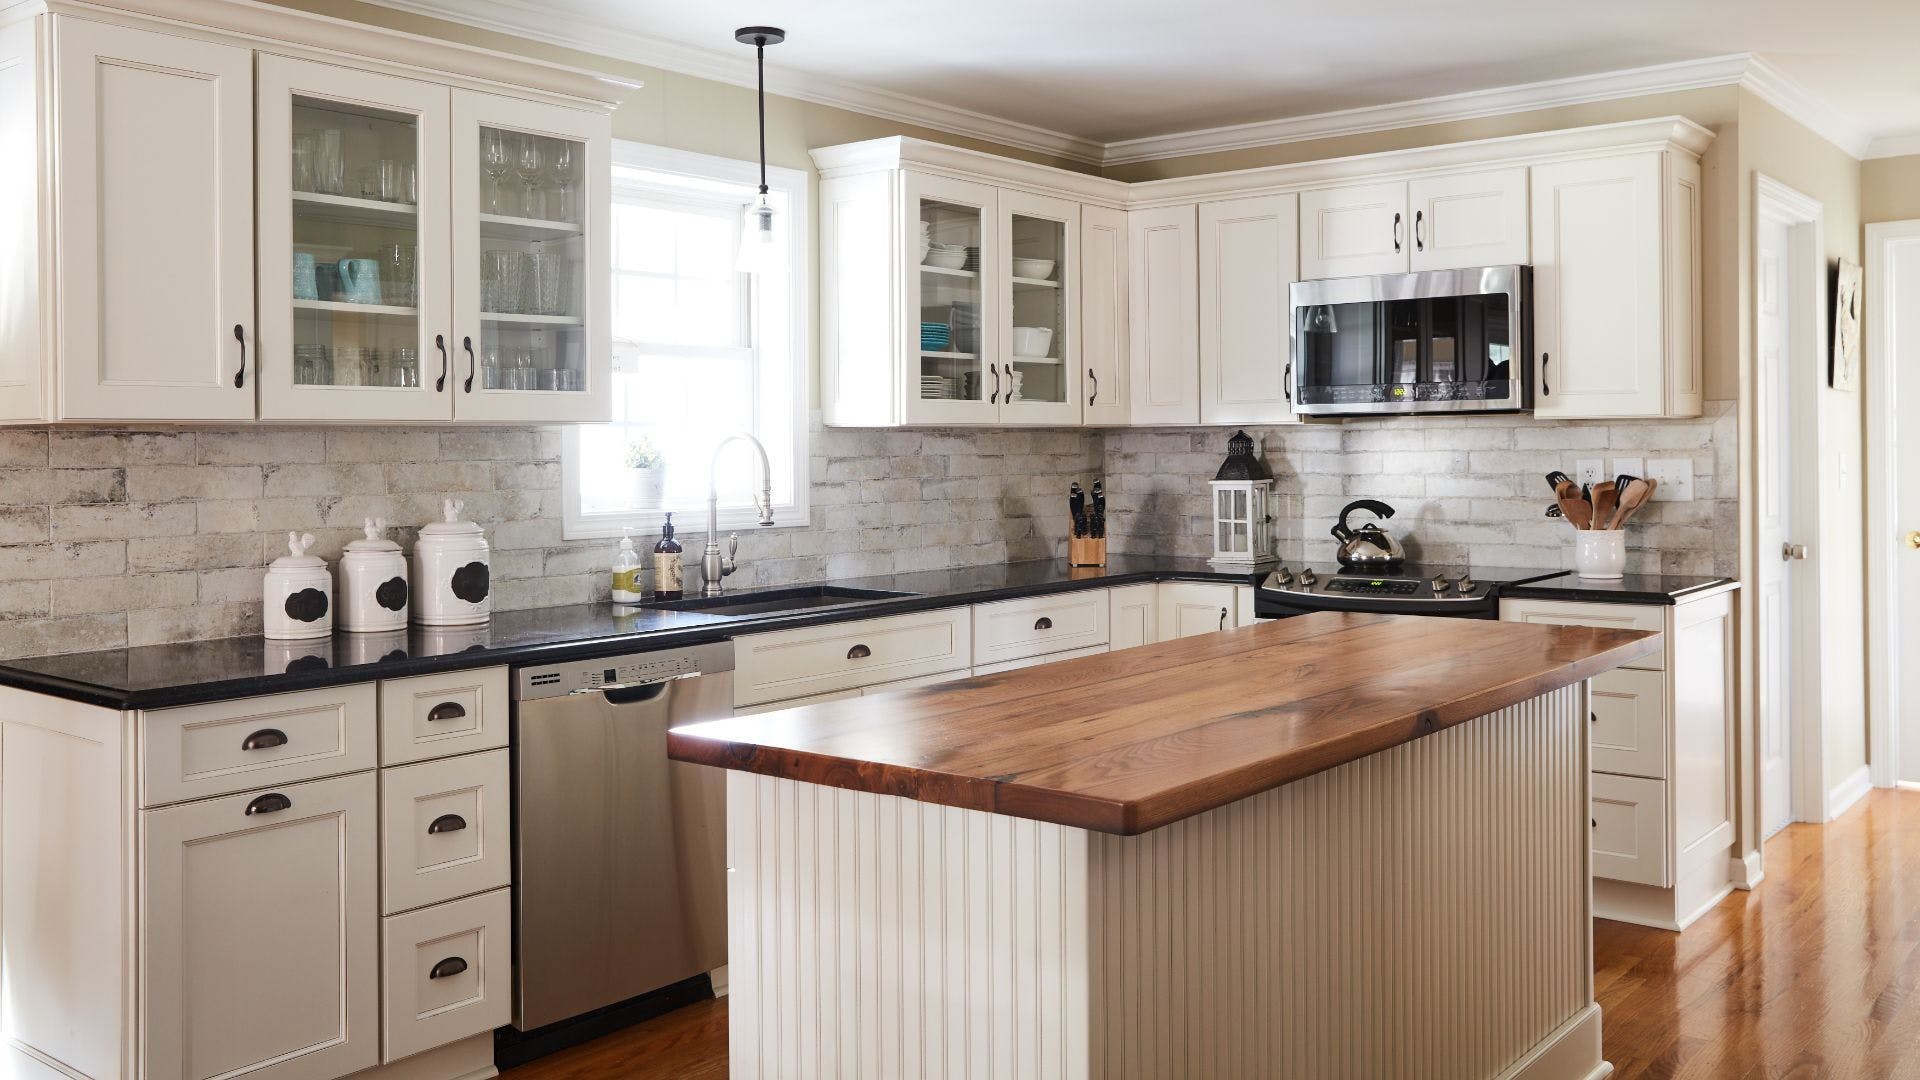 DIY Guide to Replace Kitchen Cabinet Doors with Glass Inserts